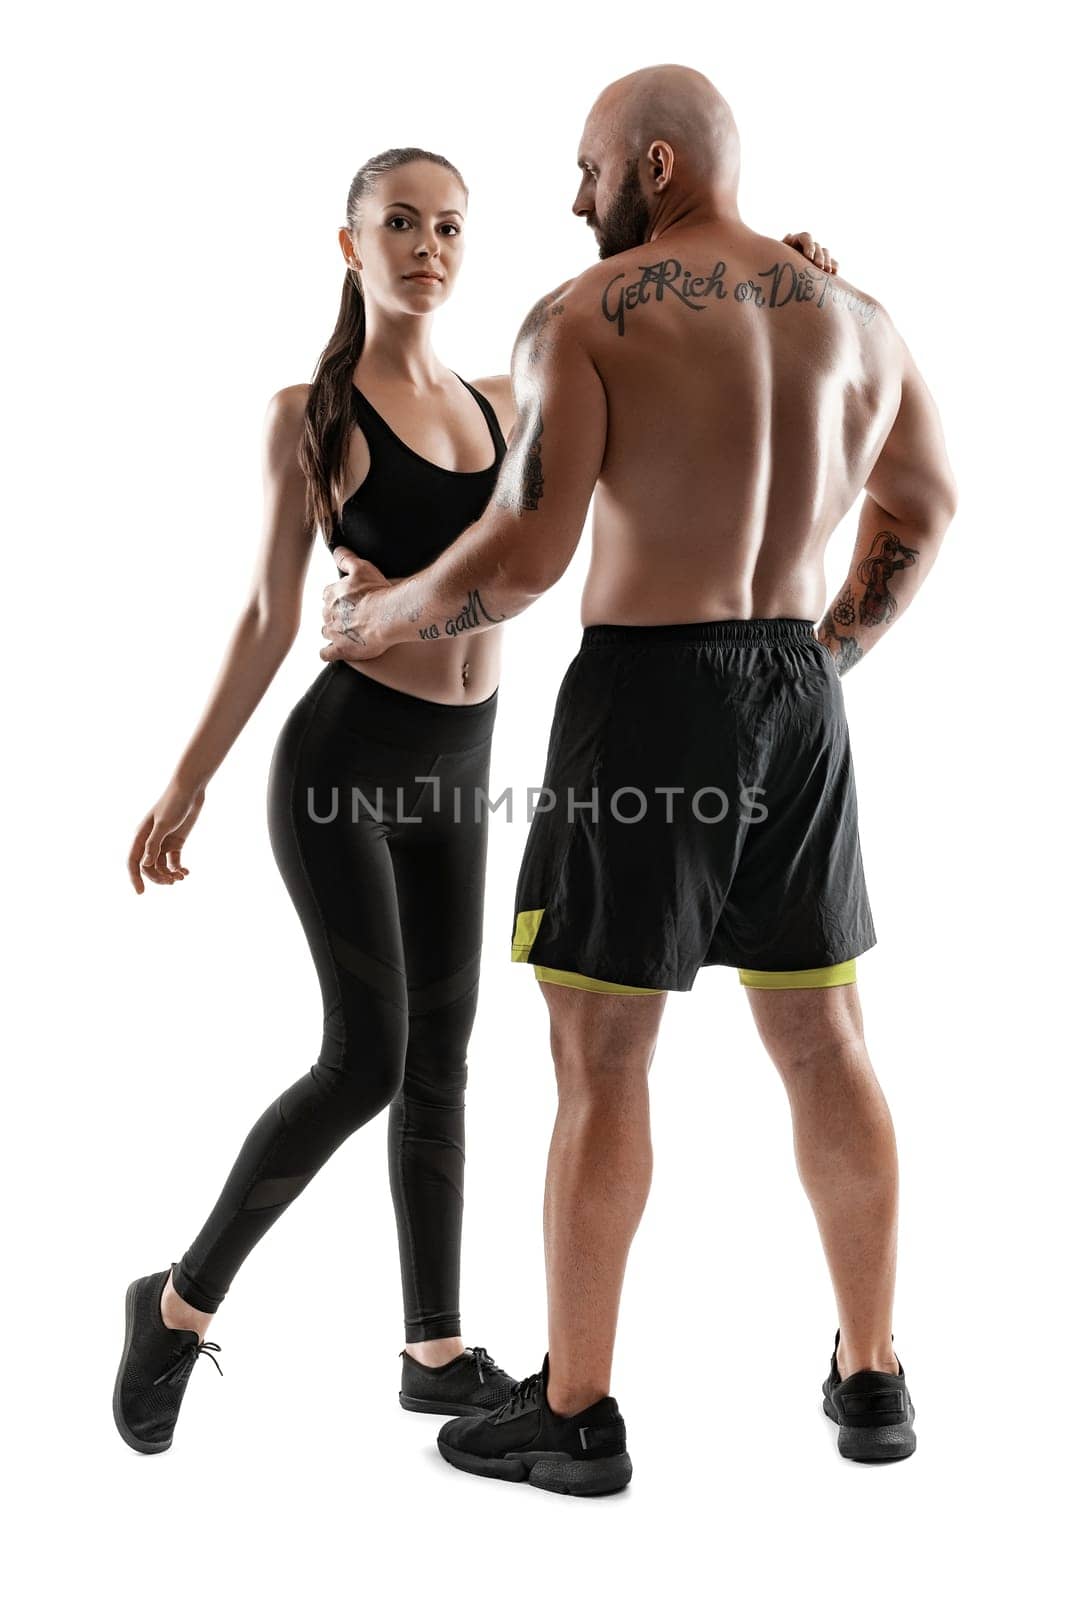 Good-looking bald, tattooed man in black shorts and sneakers, standing back, with alluring brunette maiden in leggings and top are posing isolated on white background and looking at the camera. Fitness couple, chic muscular bodies, gym concept. The love story.